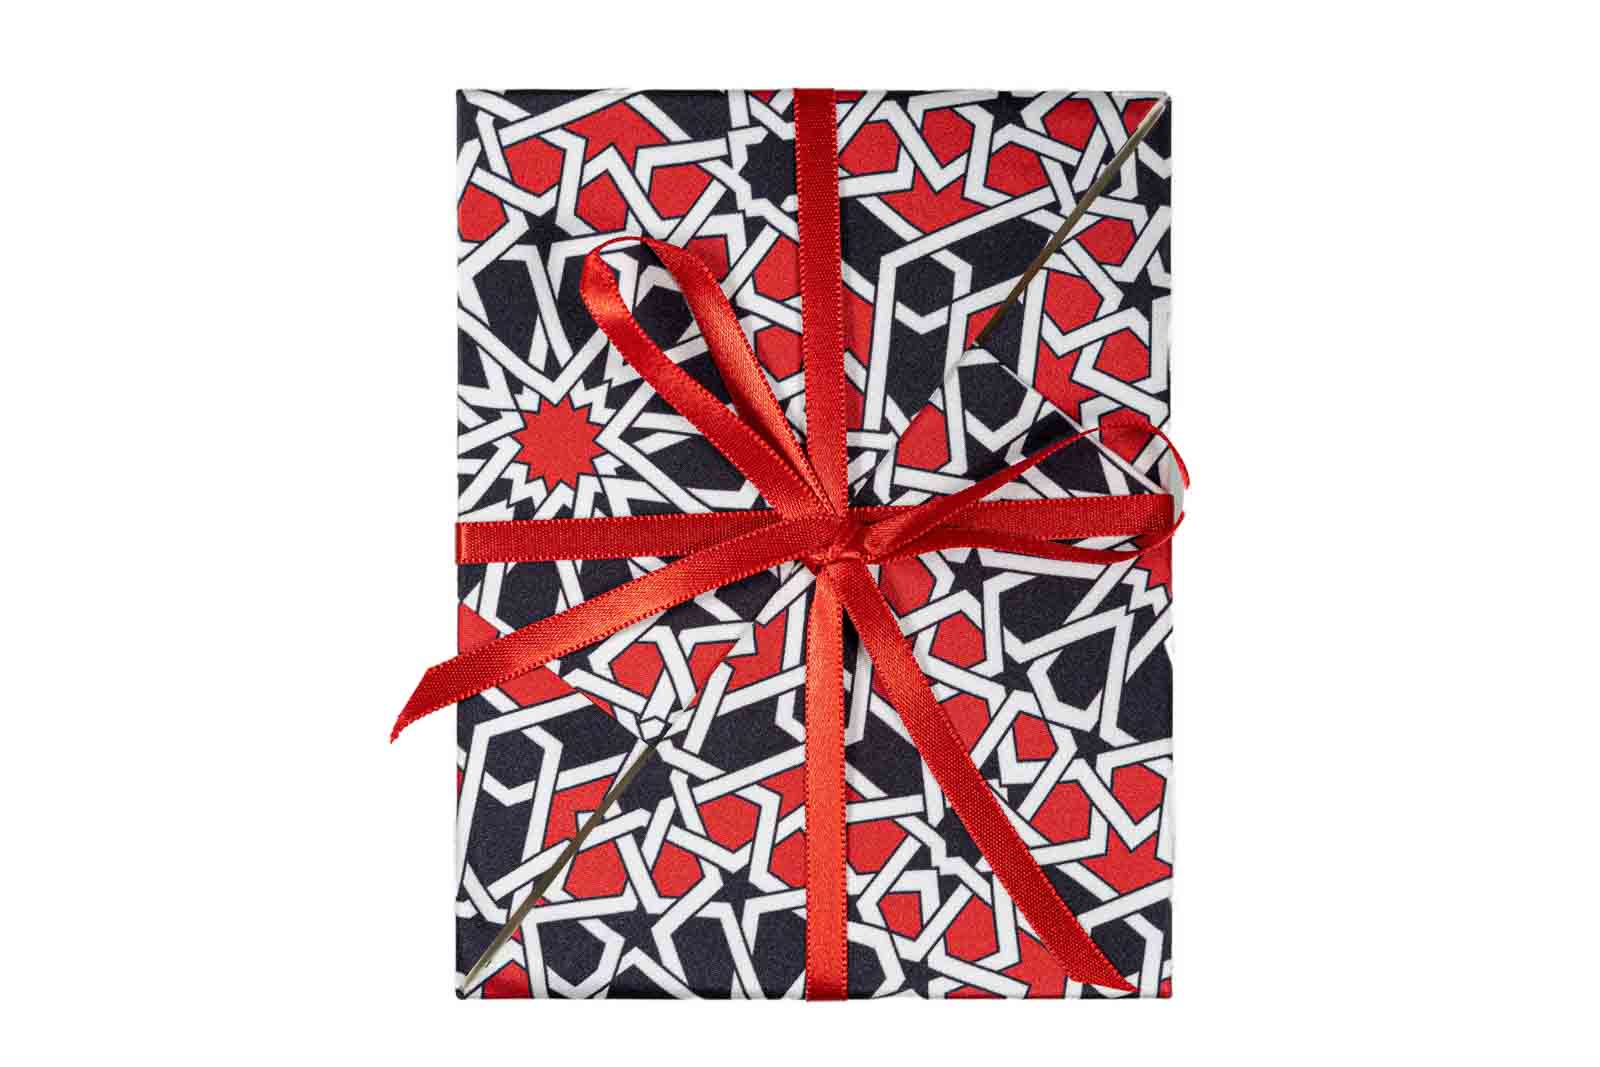 Sustainable Christmas Cards White Black and Red Geometric Print